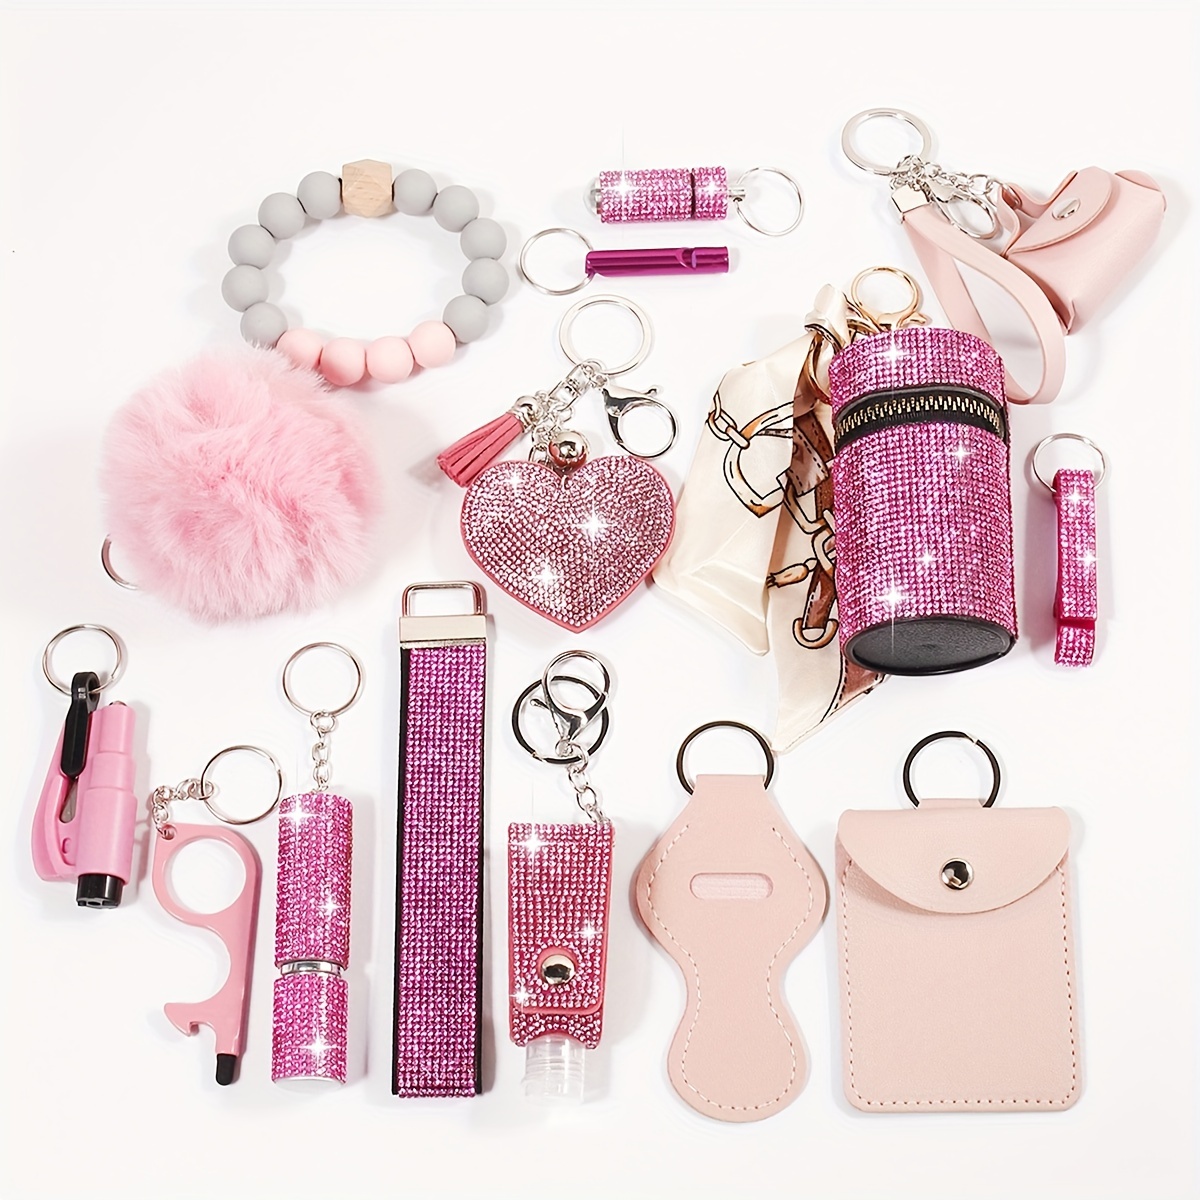 

15pcs Women's Rhinestone Safety Keychain Set - Keyring With Storage Pouch And Fluffy Pom Card Holder Accessories Kit